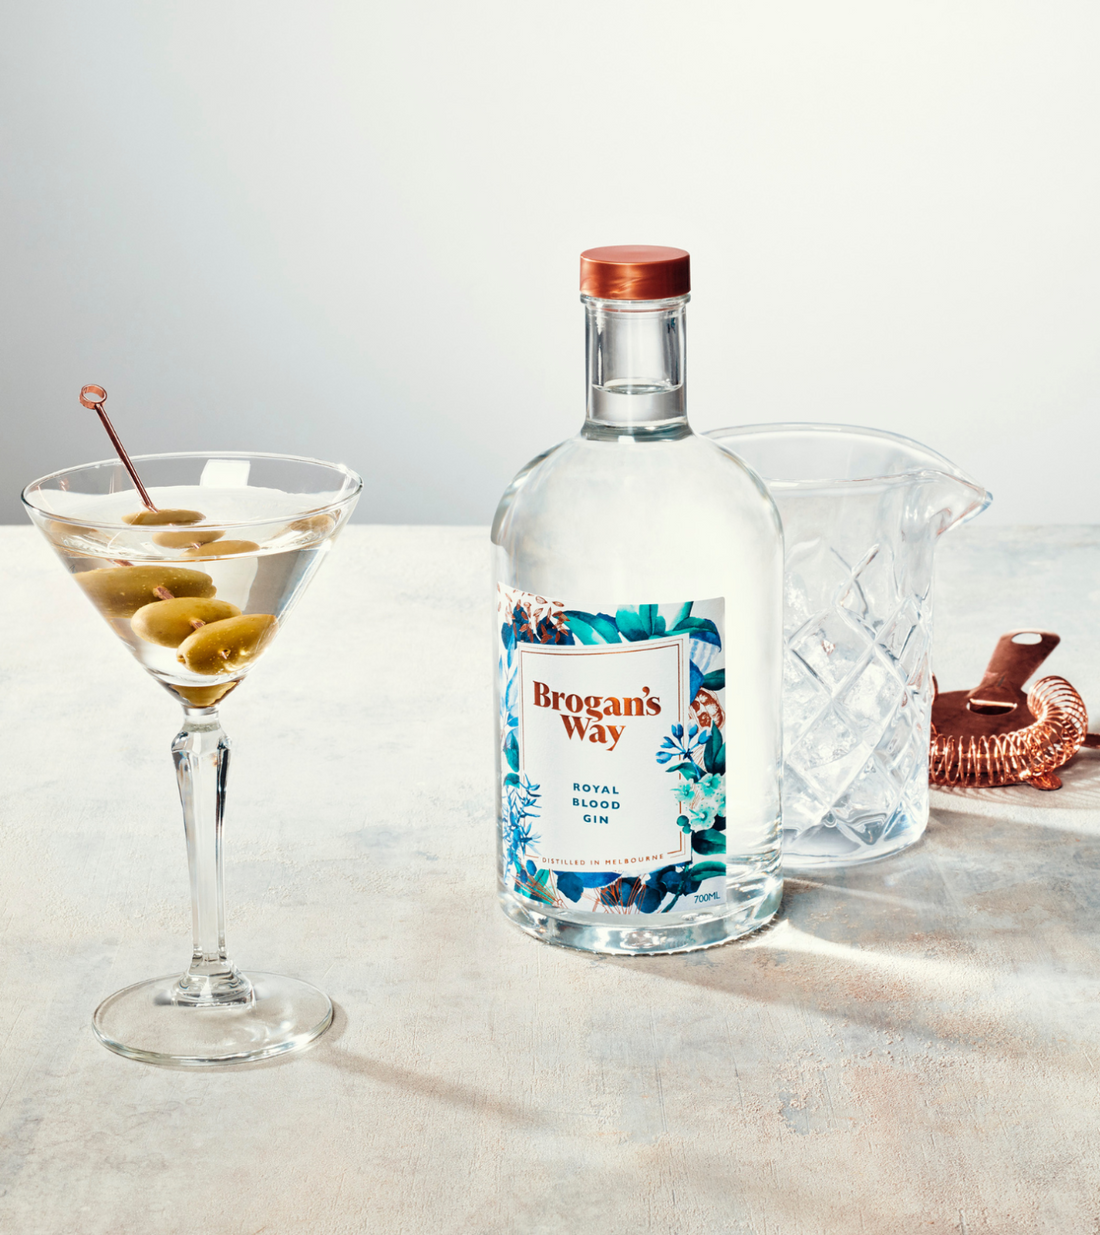 Set Sail With Our Navy-Strength Gin, Royal Blood